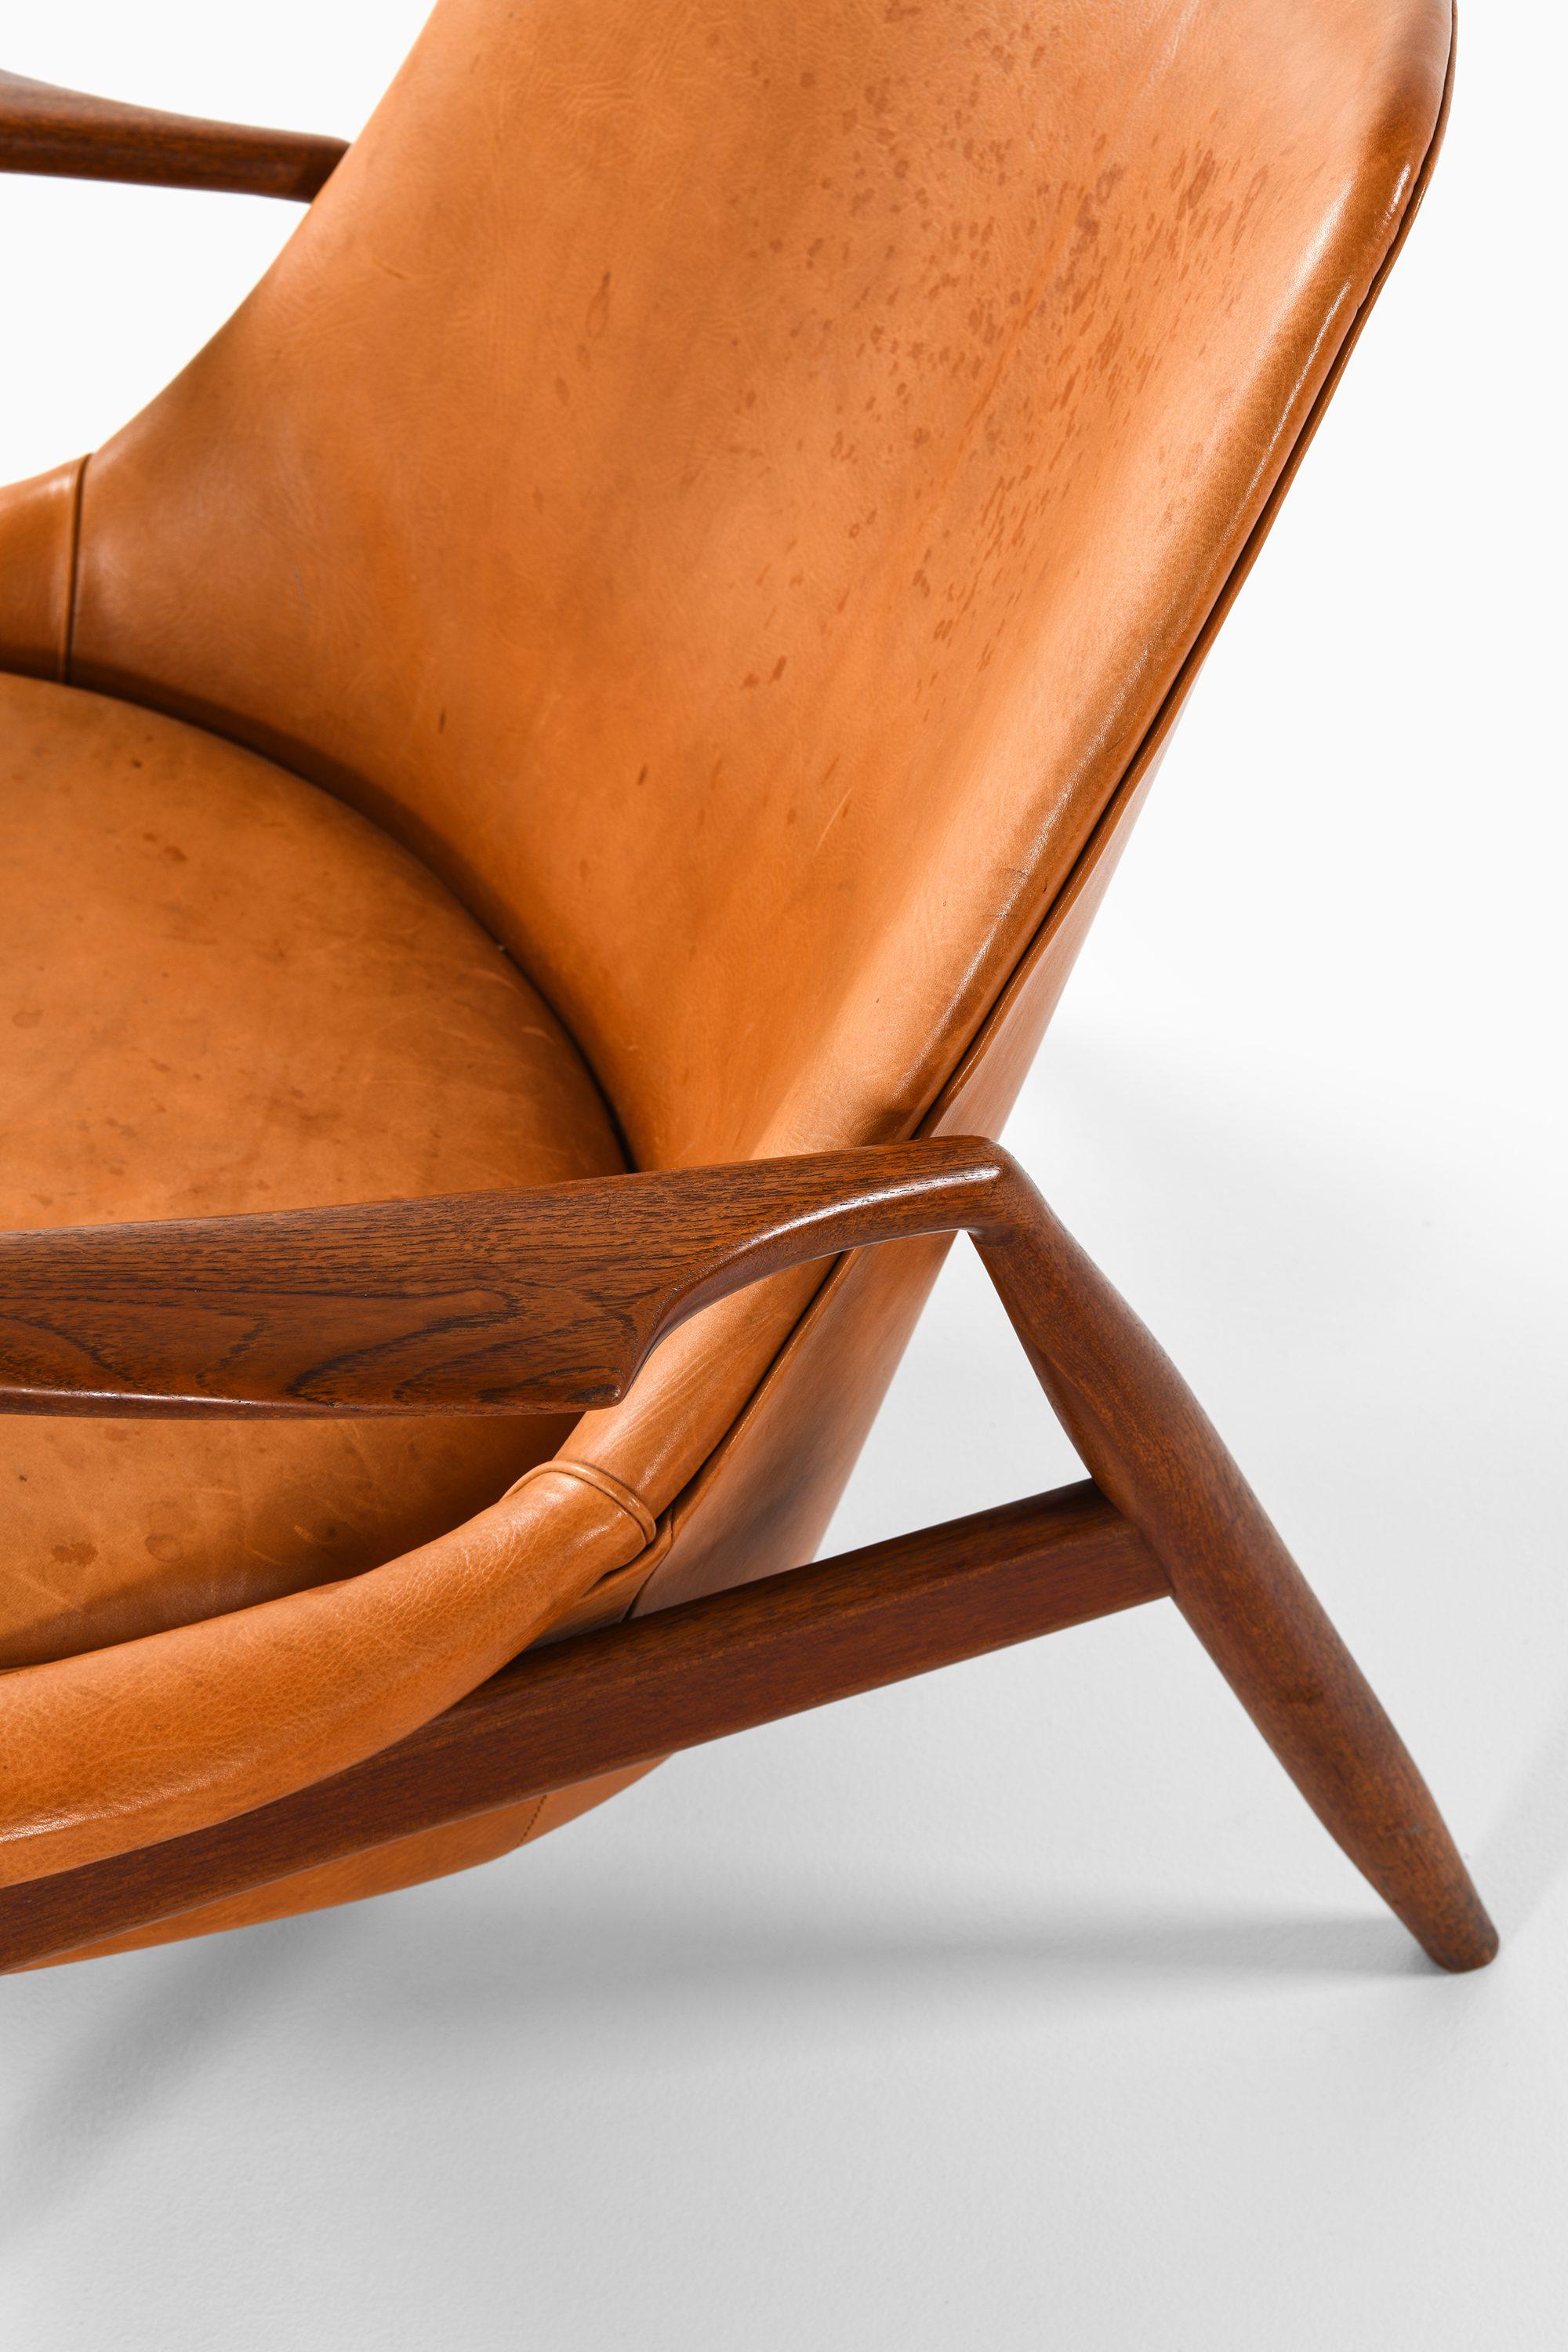 Pair of Easy Chairs in Teak and Leather by Ib Kofod-Larsen, 1950s For Sale 2